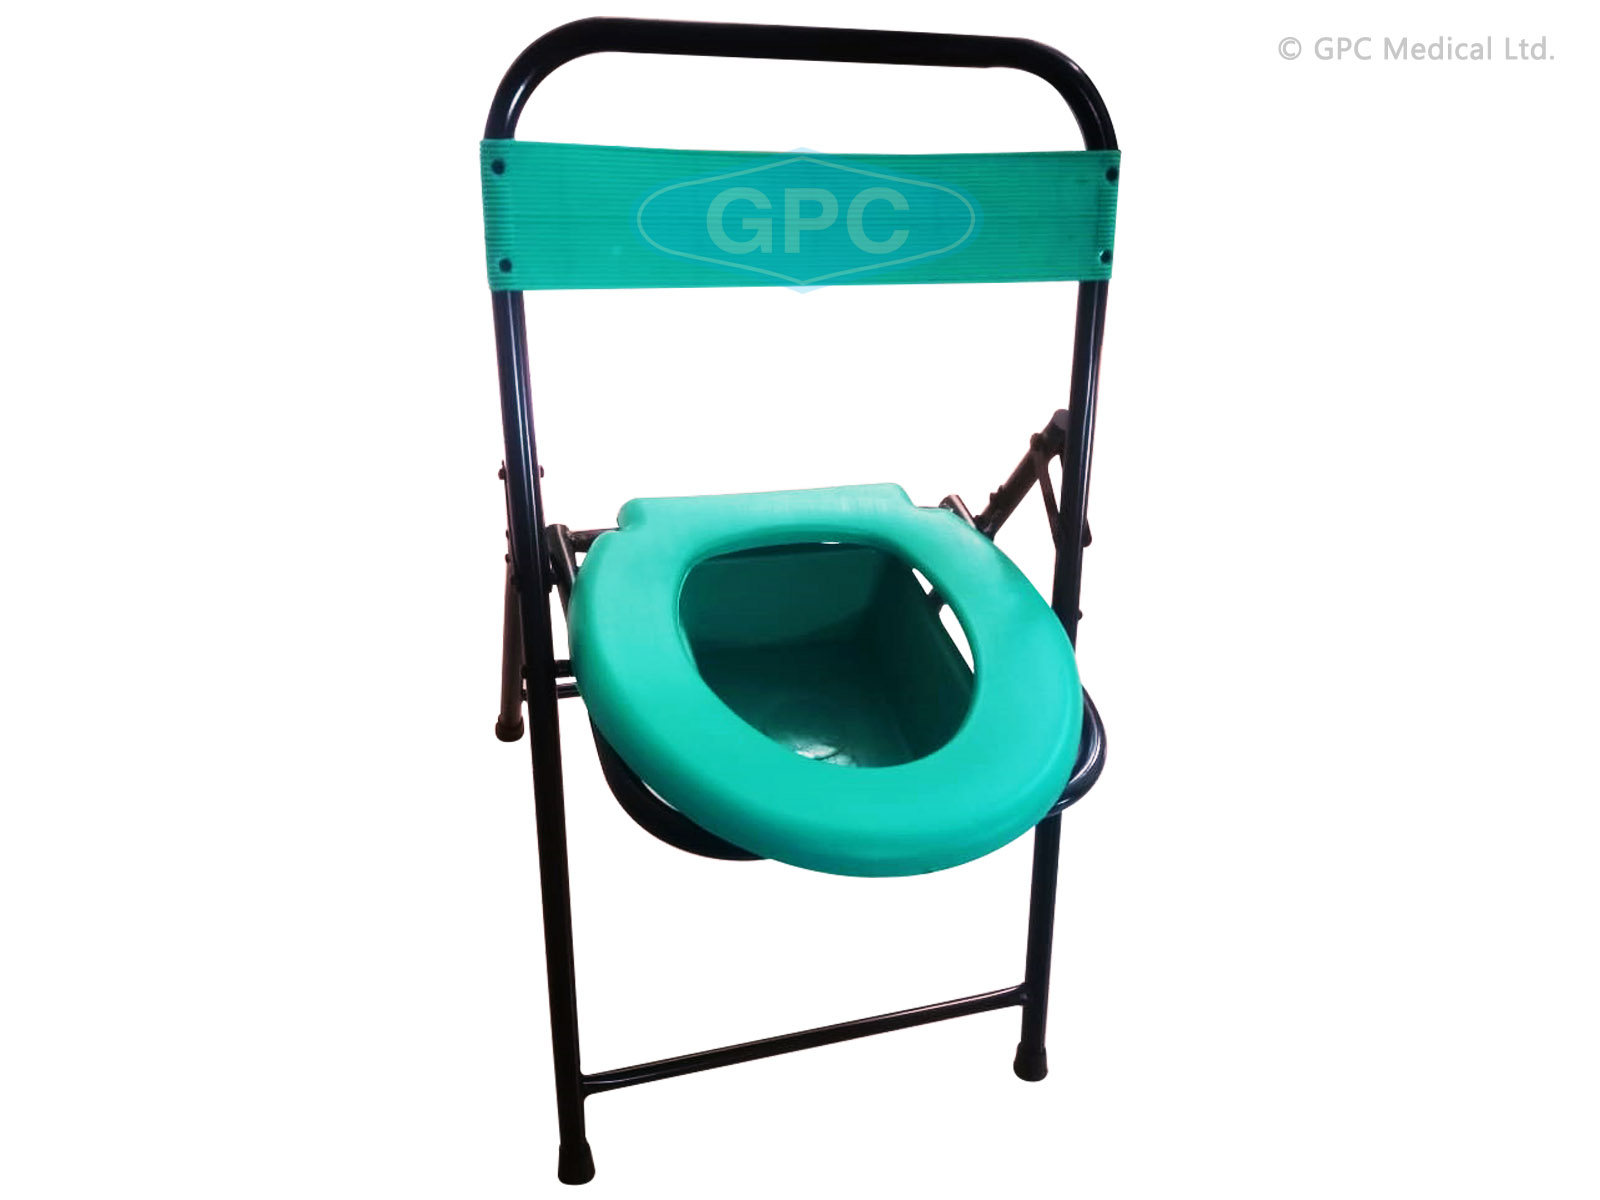 Folding Commode Chair With Back